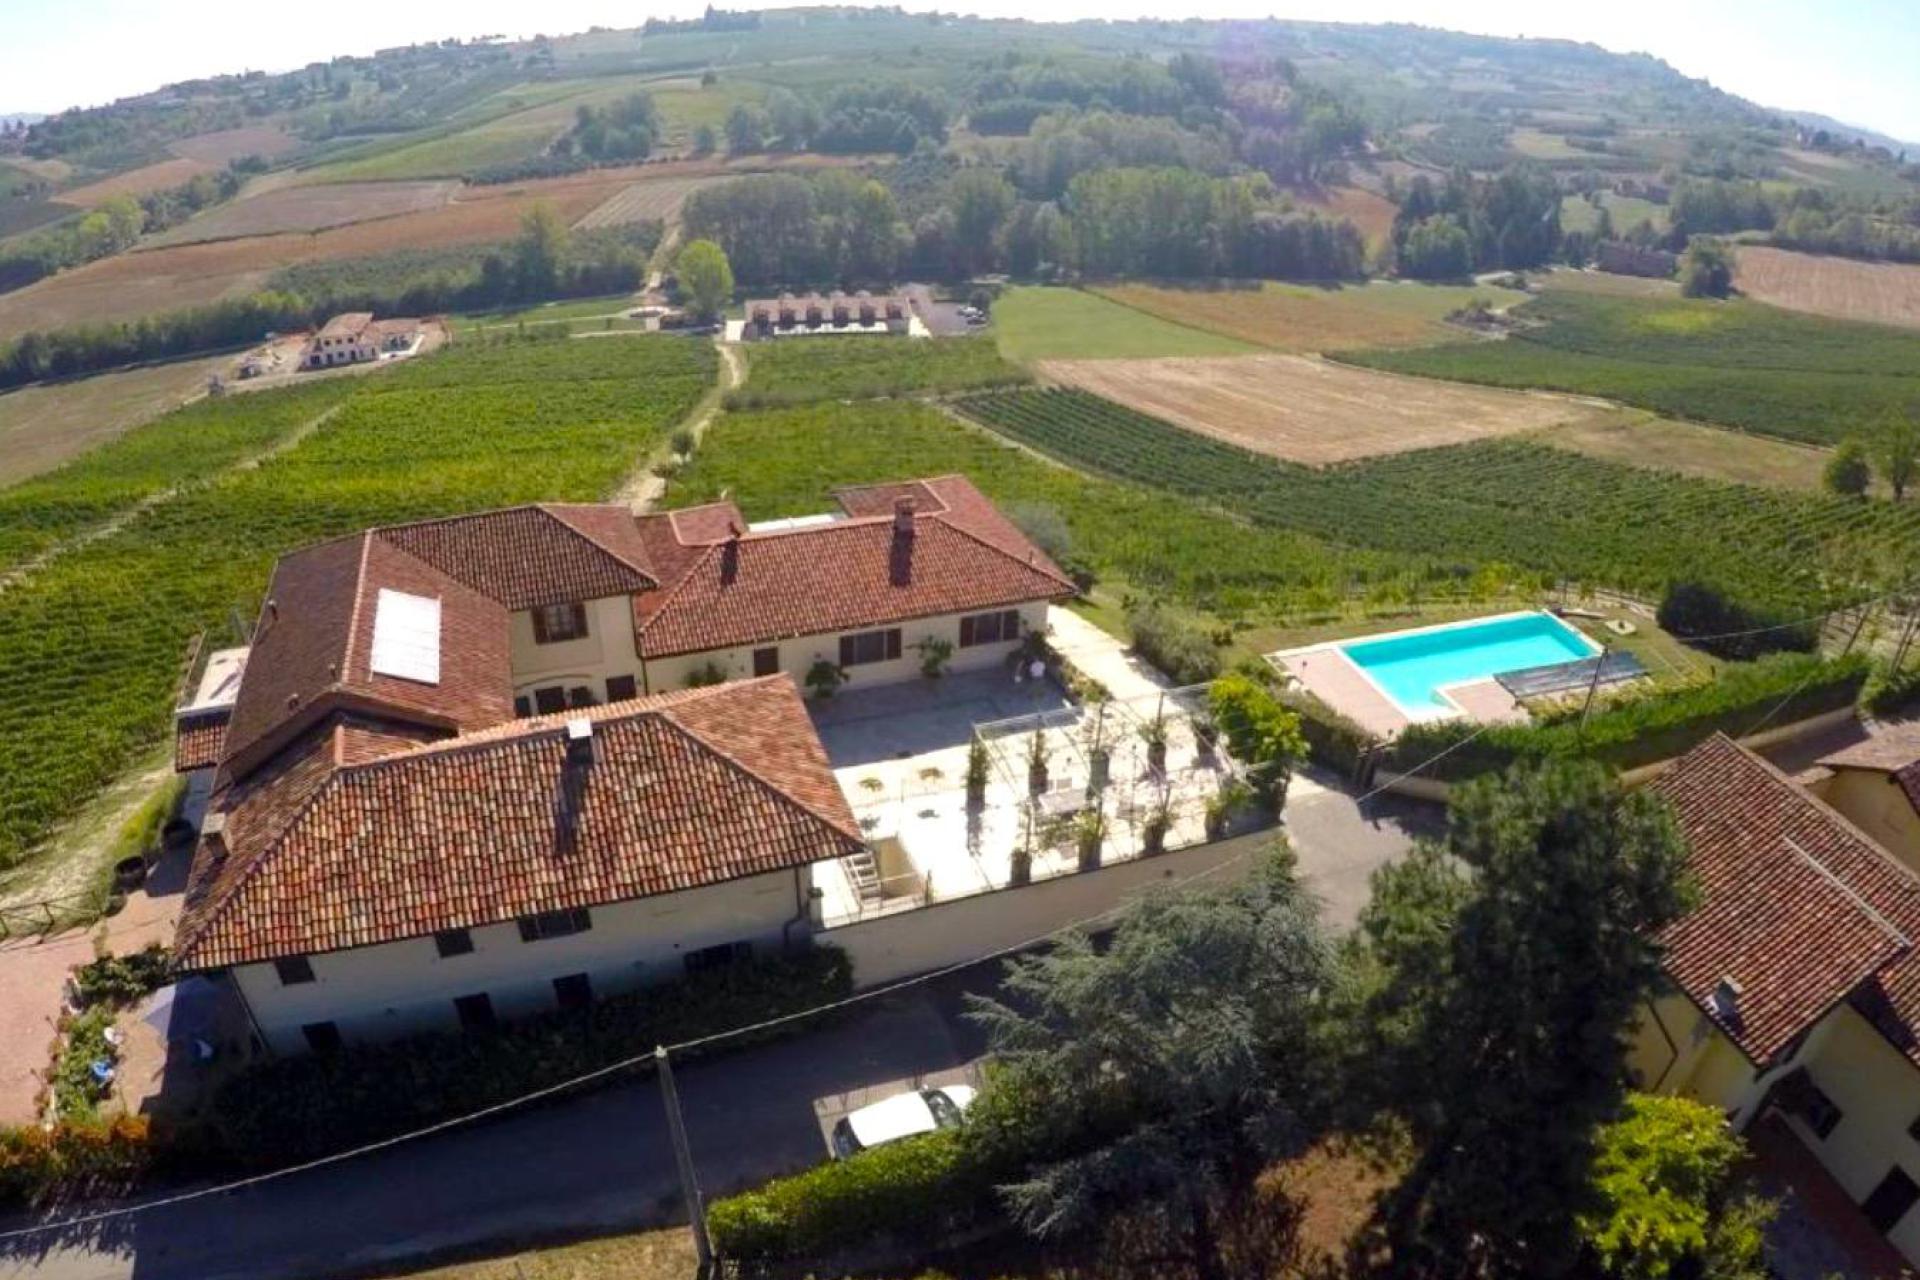 Agriturismo - Farmhouse and winery in the Piedmont hills